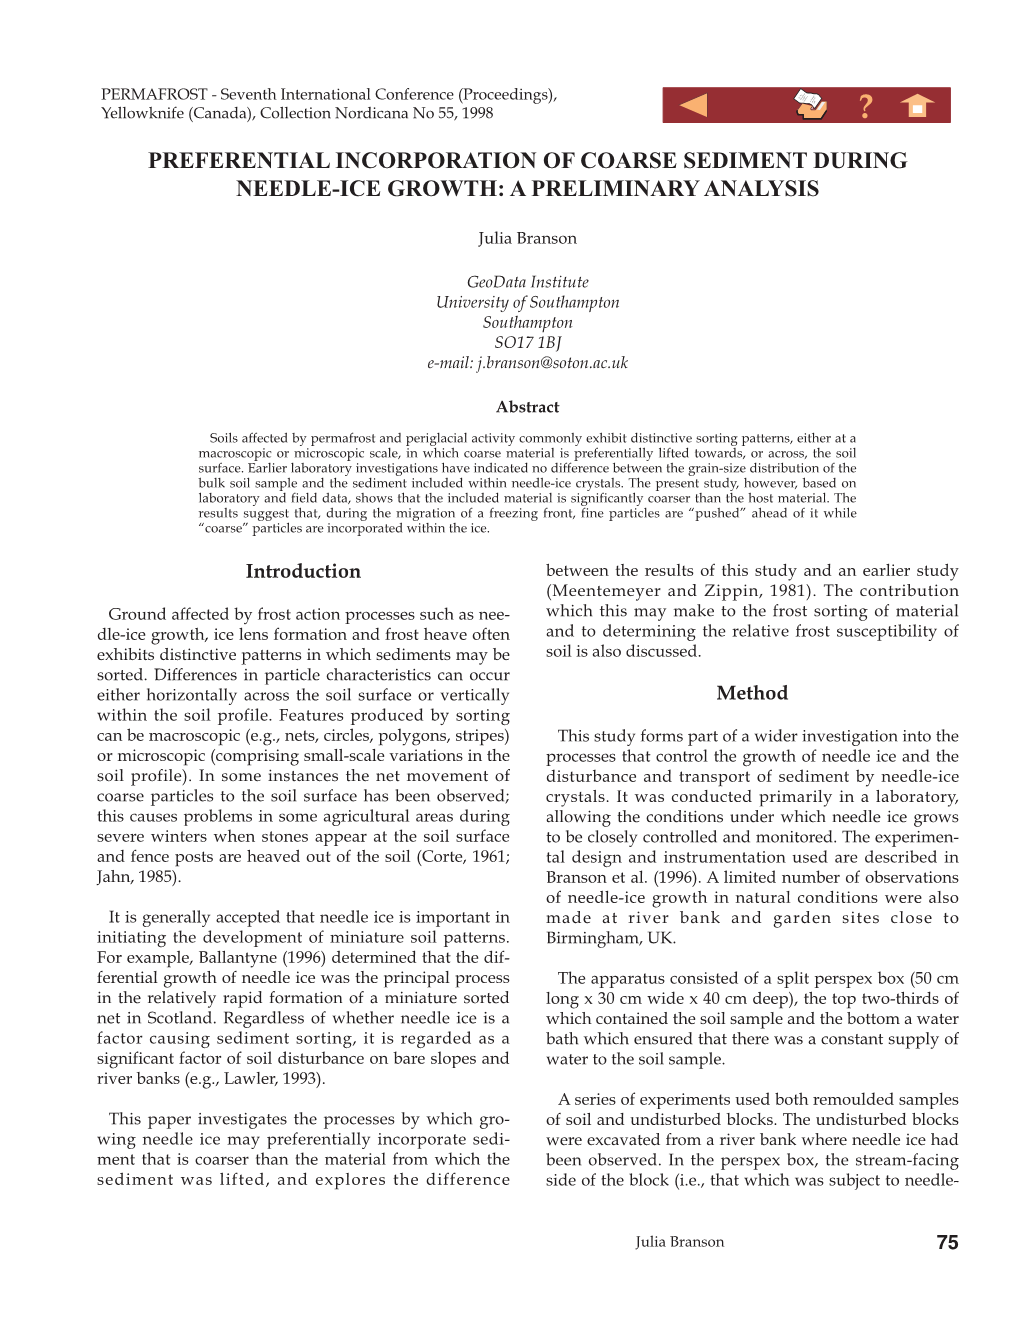 Preferential Incorporation of Coarse Sediment During Needle-Ice Growth: a Preliminary Analysis